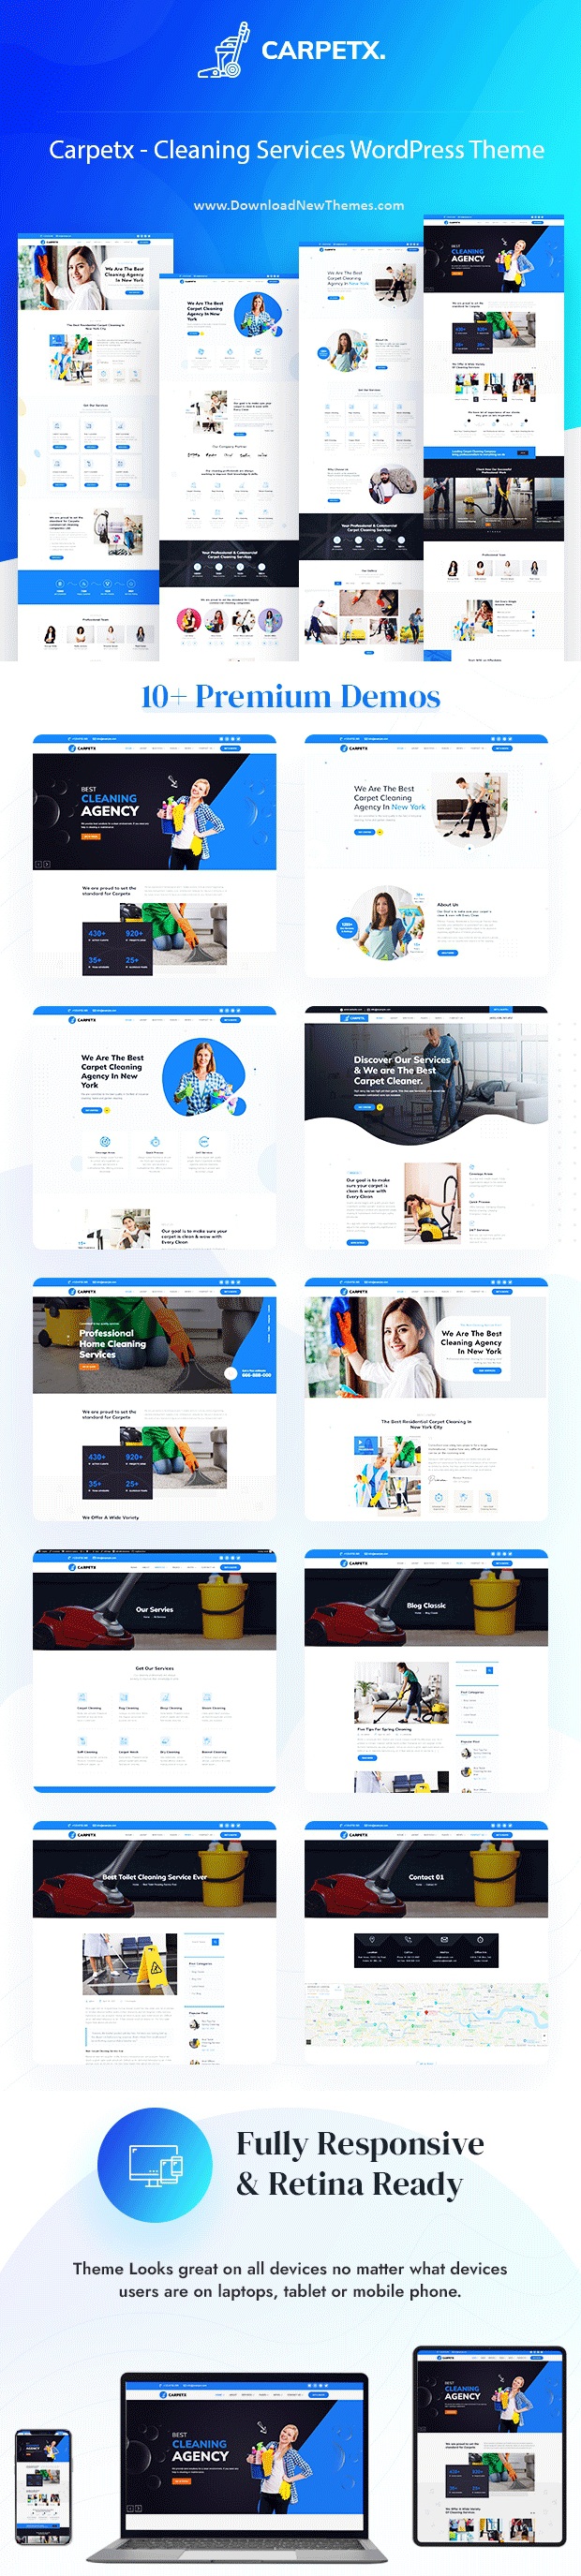 Carpetx - Cleaning Services WordPress Theme Review